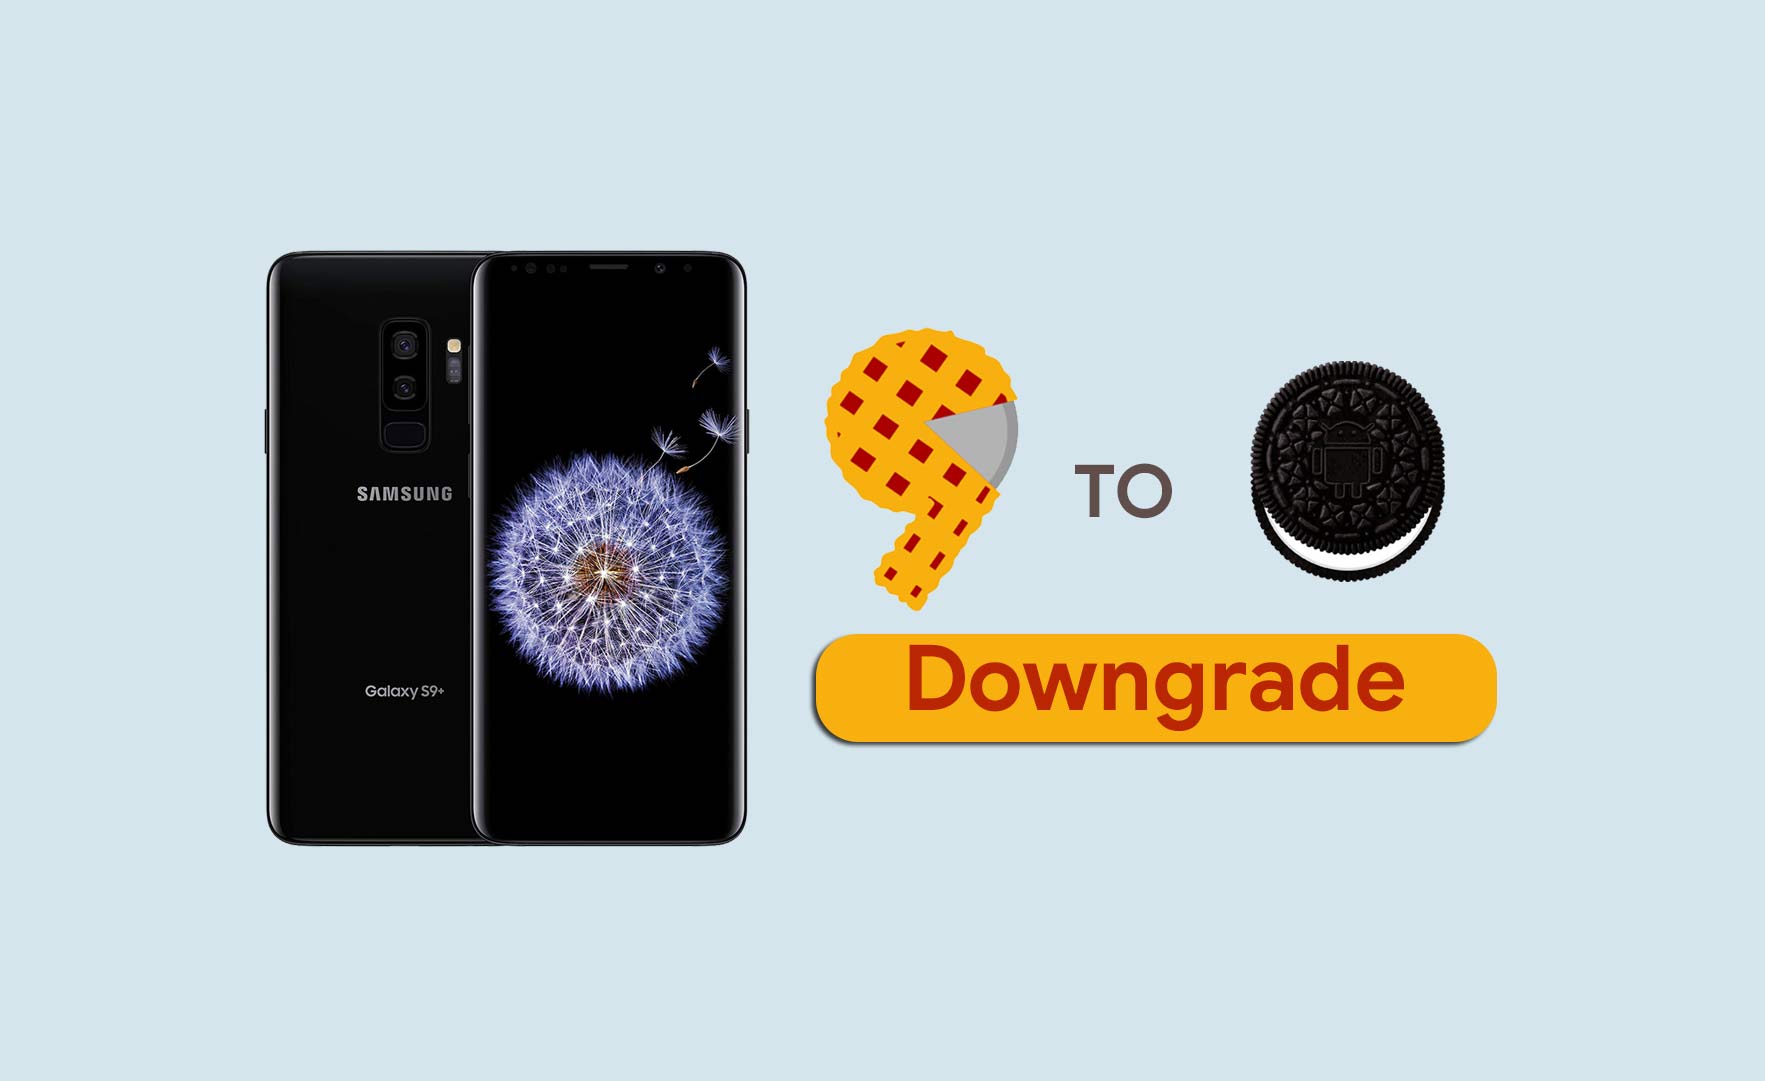 How to Downgrade Galaxy S9 Plus from Android 9.0 Pie to Oreo